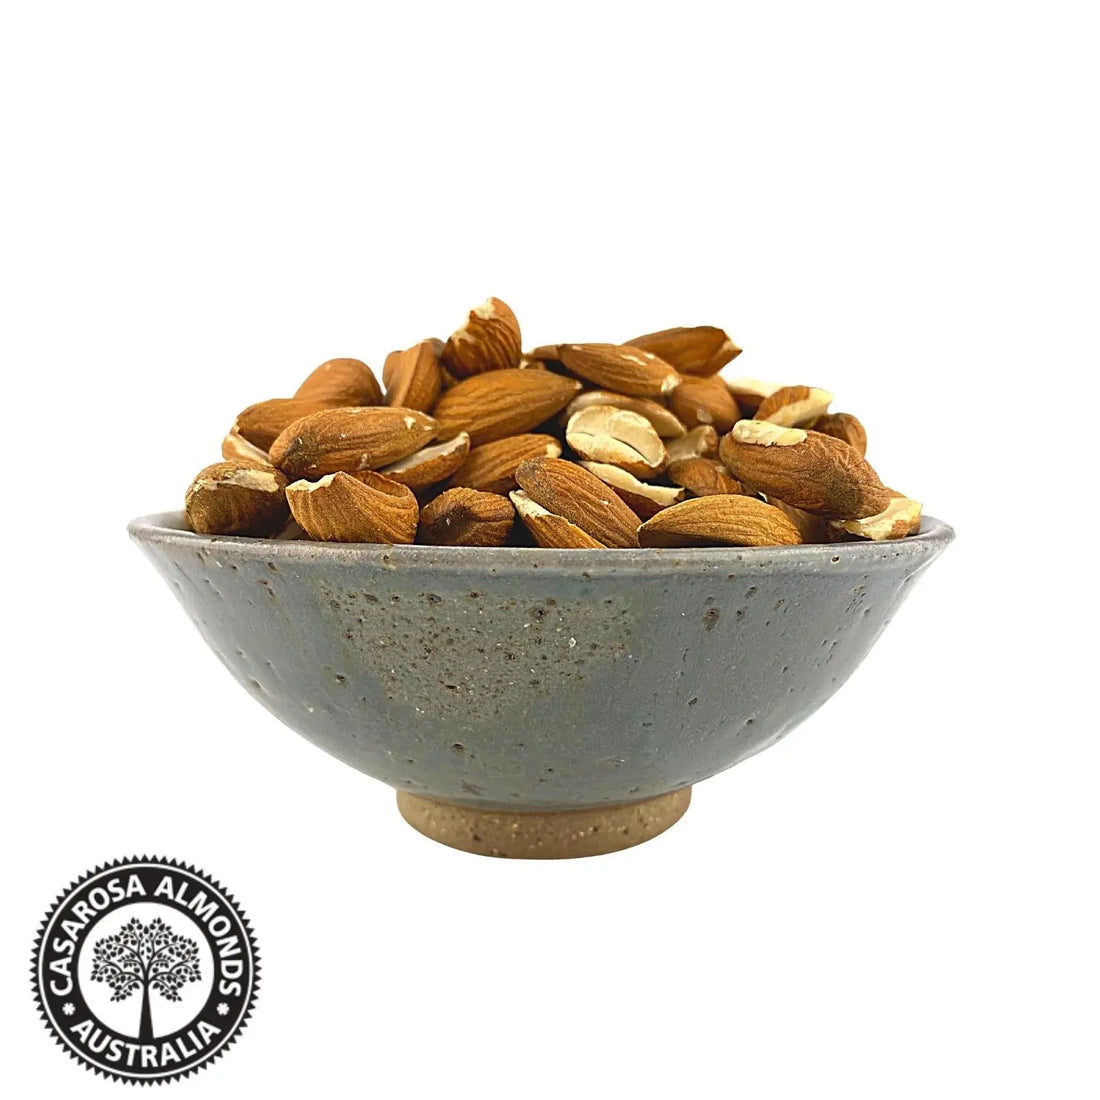 Almonds Processing Grade Insecticide Free 5kg-Nuts & Seeds-The Almond Farmer-Sovereign Foods-Australian Grown Nuts-Pesticide Free-Chemical Free